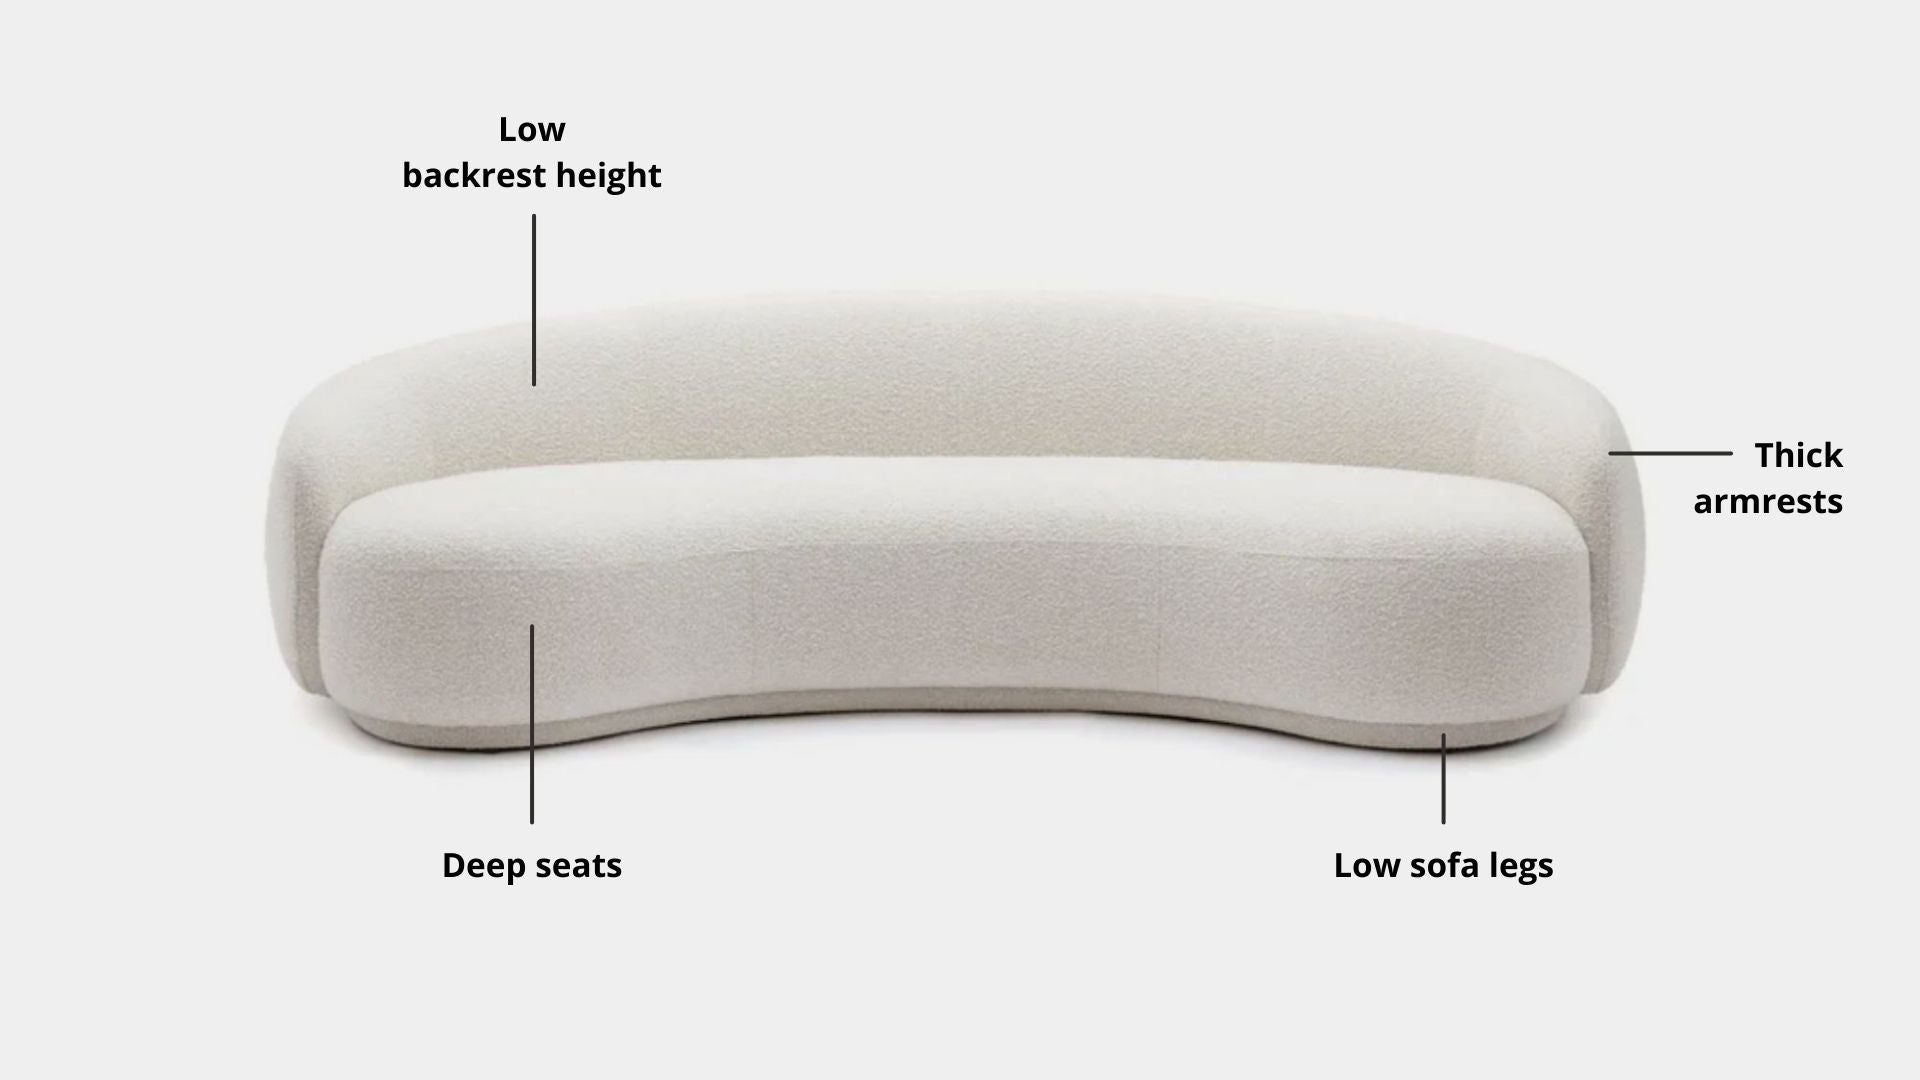 Key features such as armrest thickness, cushion height, seat depth and sofa leg height for Cashew Fabric Sofa